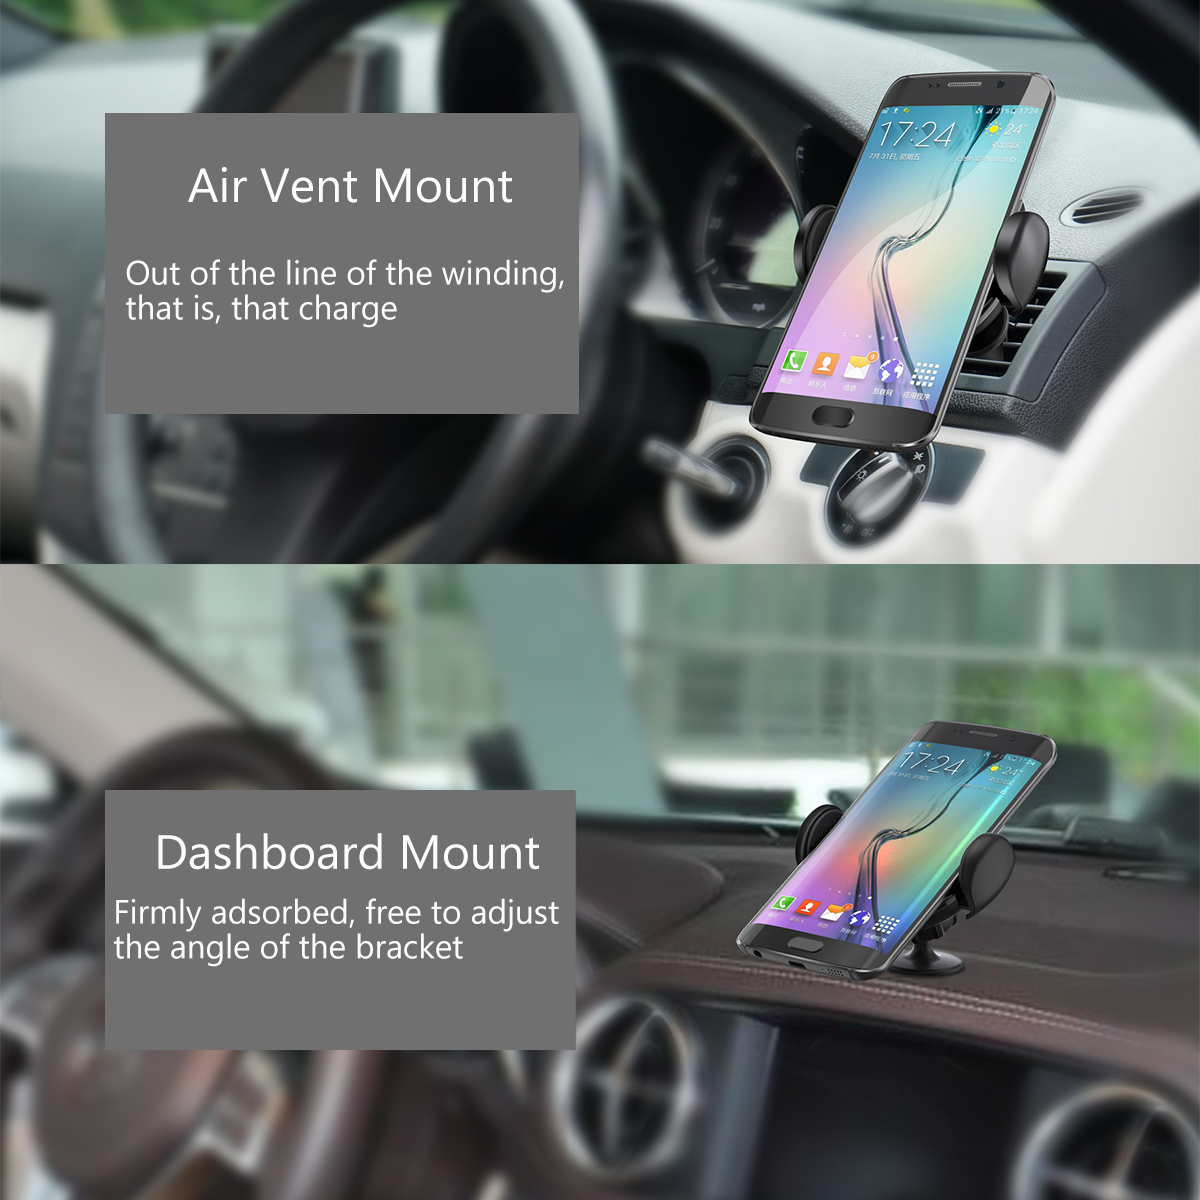 360-Degree-Wireless-Car-Mount-Charger-Dock-Air-Vent-Mount-Holder-for-iPhone-8-Plus-X-1206374-4